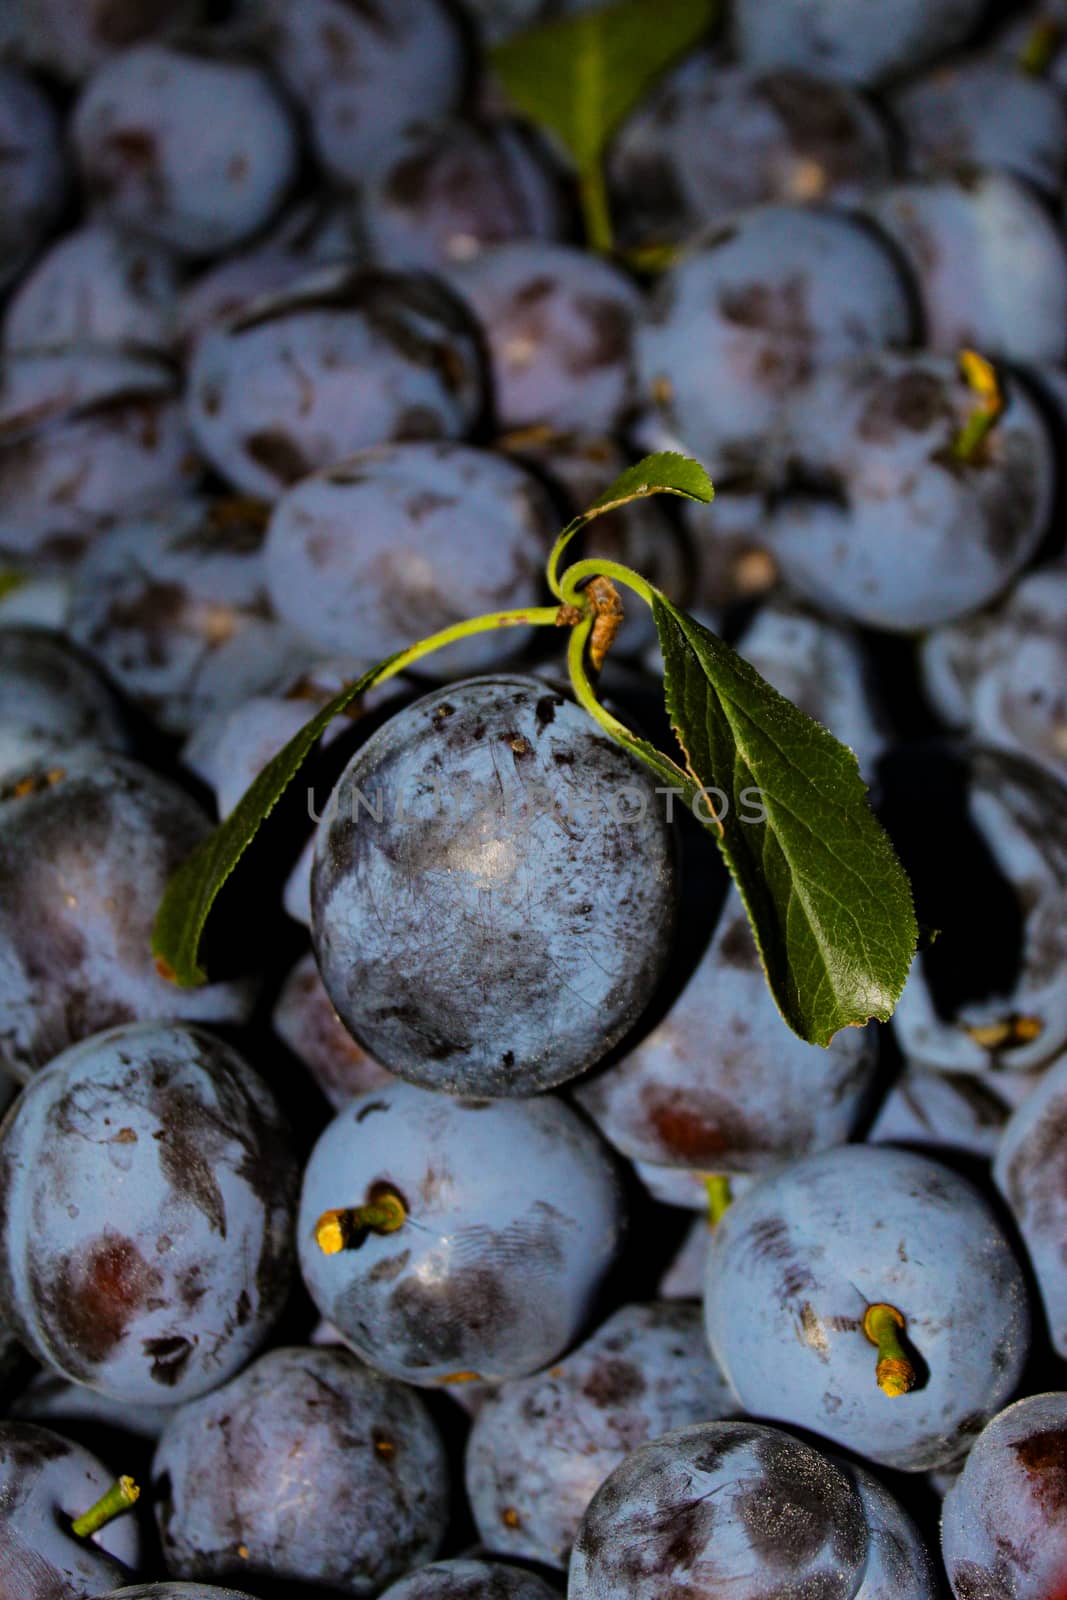 In focus one plum with leaves. Lots of ripe plums in the background. Zavidovici, Bosnia and Herzegovina.